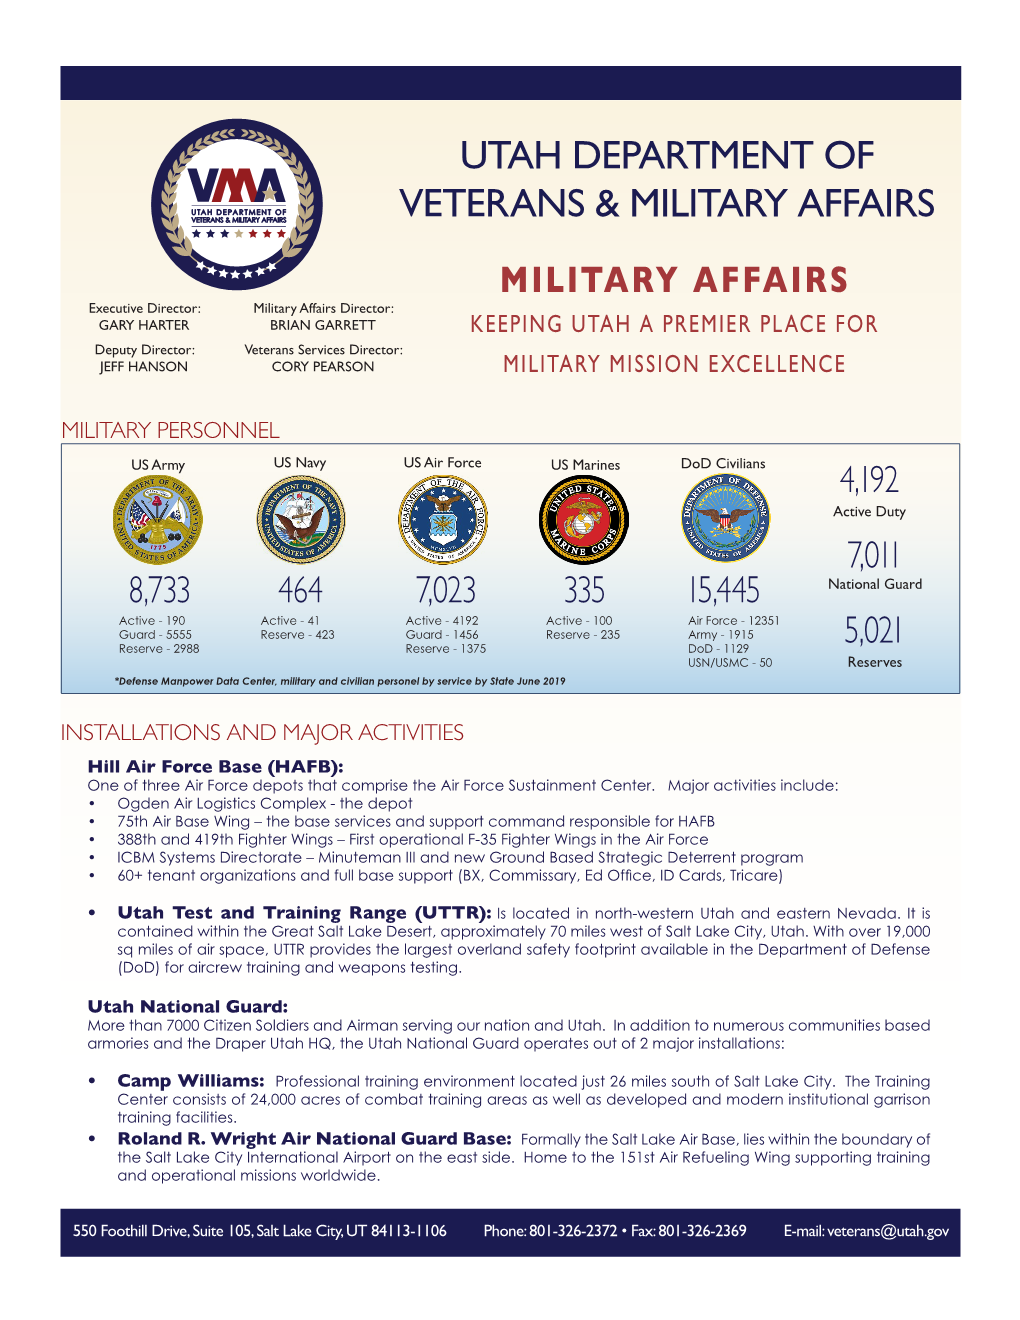 Our Military Affairs Info Sheet